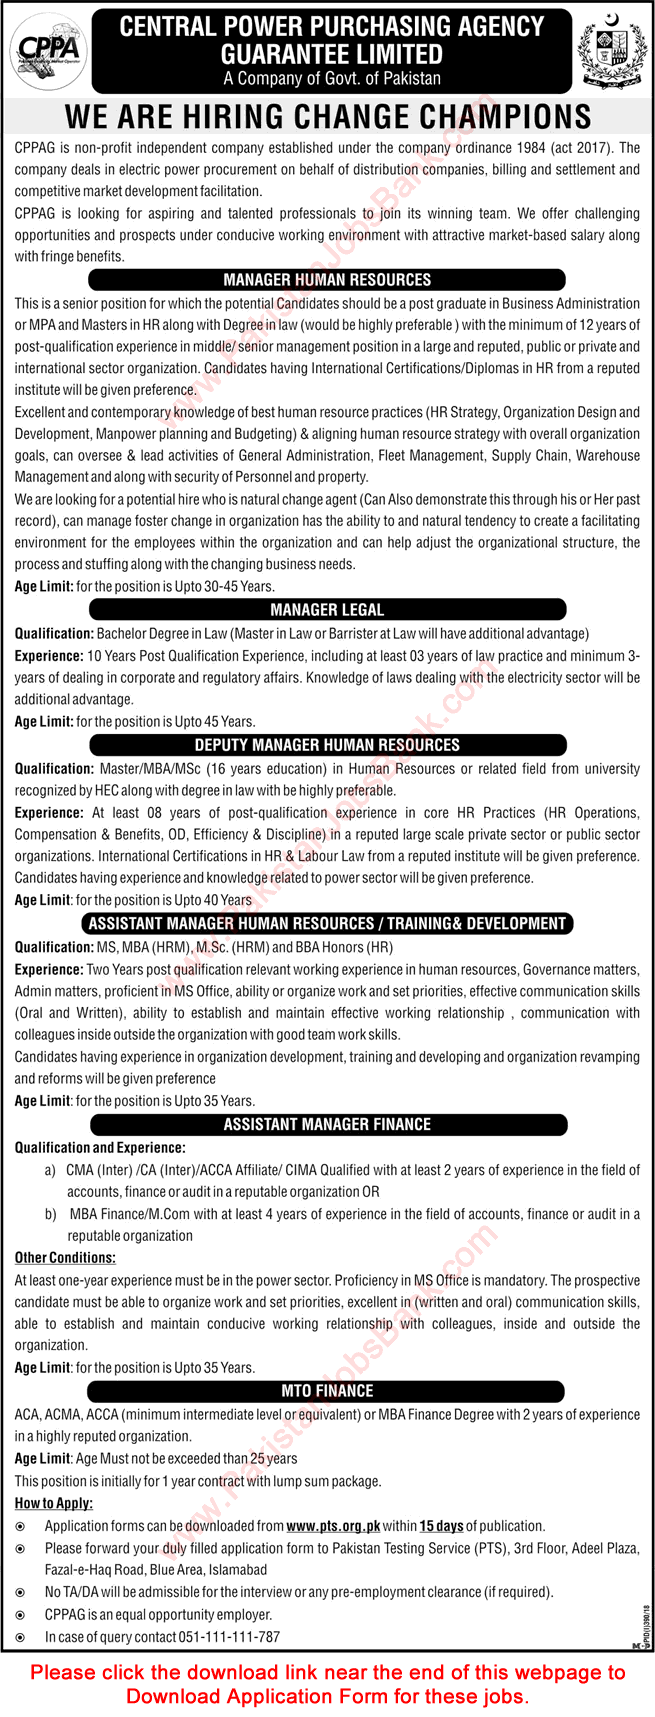 Central Power Purchasing Agency Pakistan Jobs July 2018 PTS Application Form CPPA / CPPAG Latest